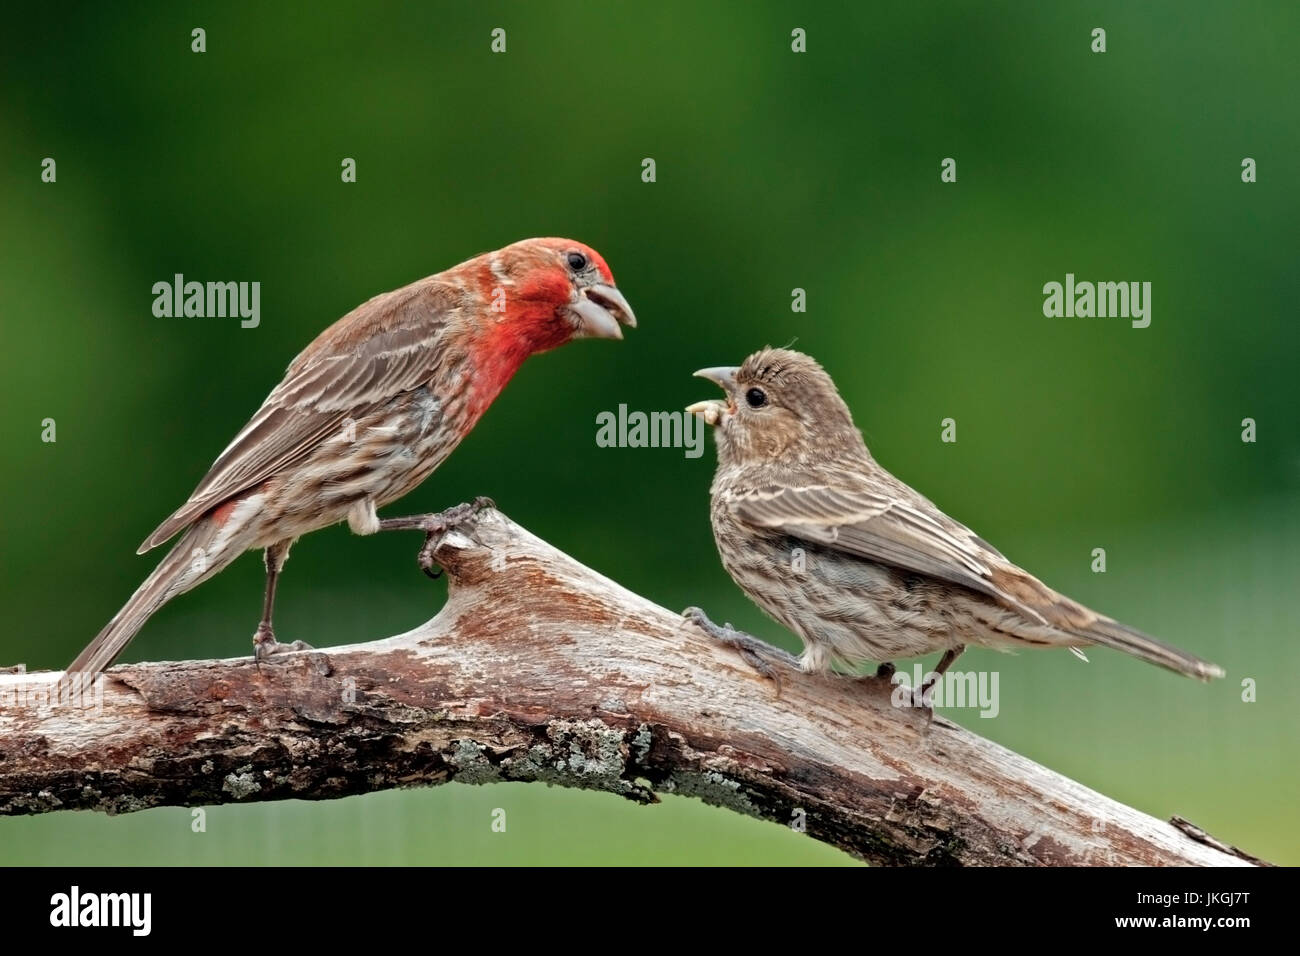 House finch feeds fledgling Stock Photo